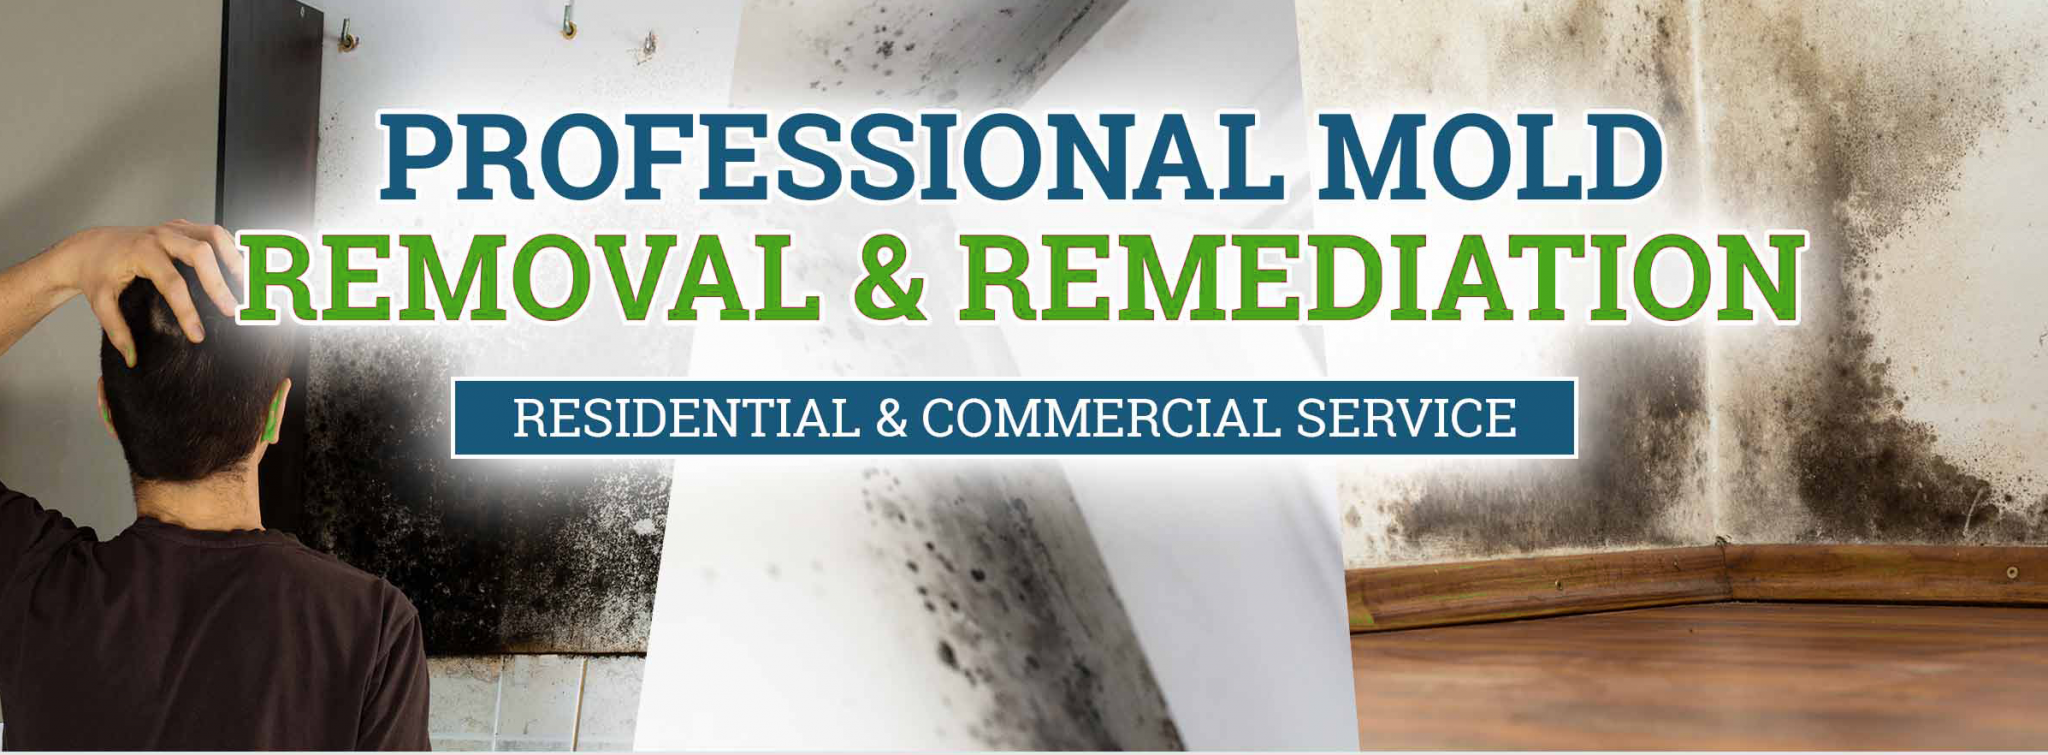 mold-removal-and-remediation-green-e1618327821622-2048x755